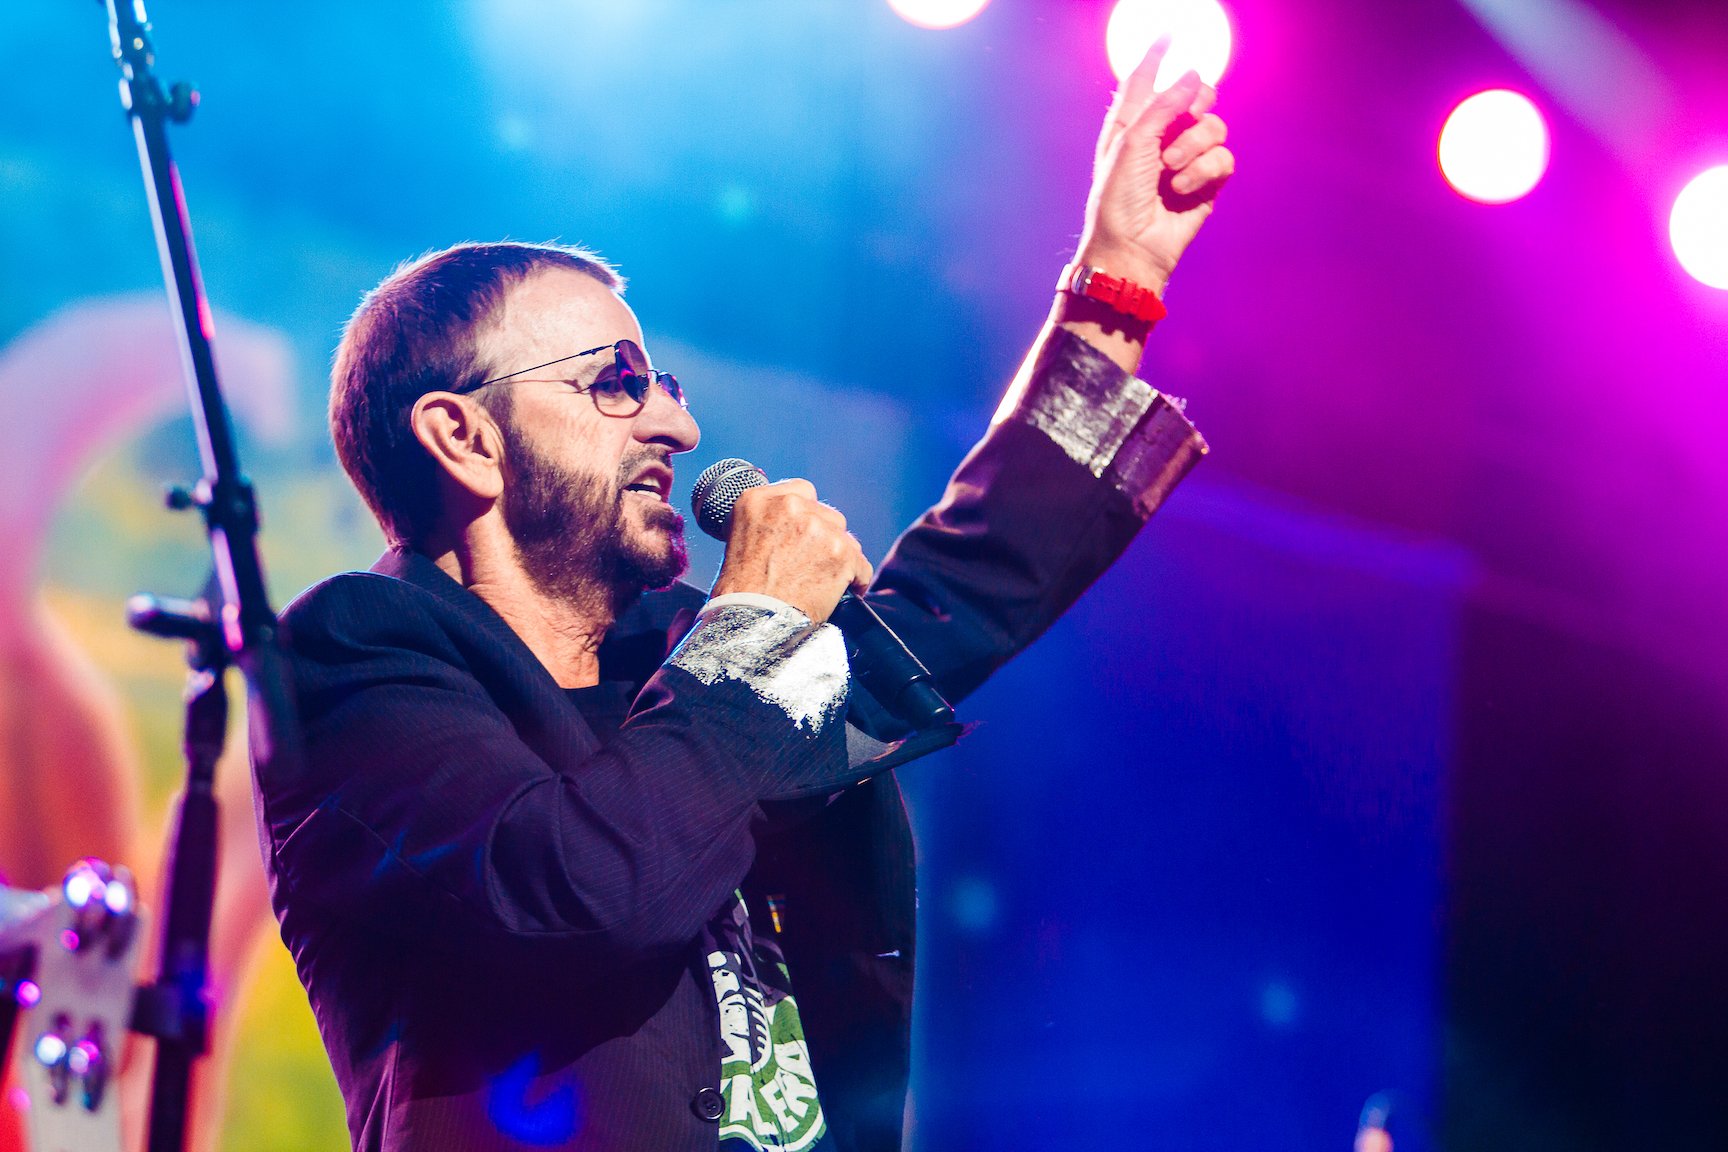 Ringo Starr performs with the All Starr Band in Sao Paulo, Brazil